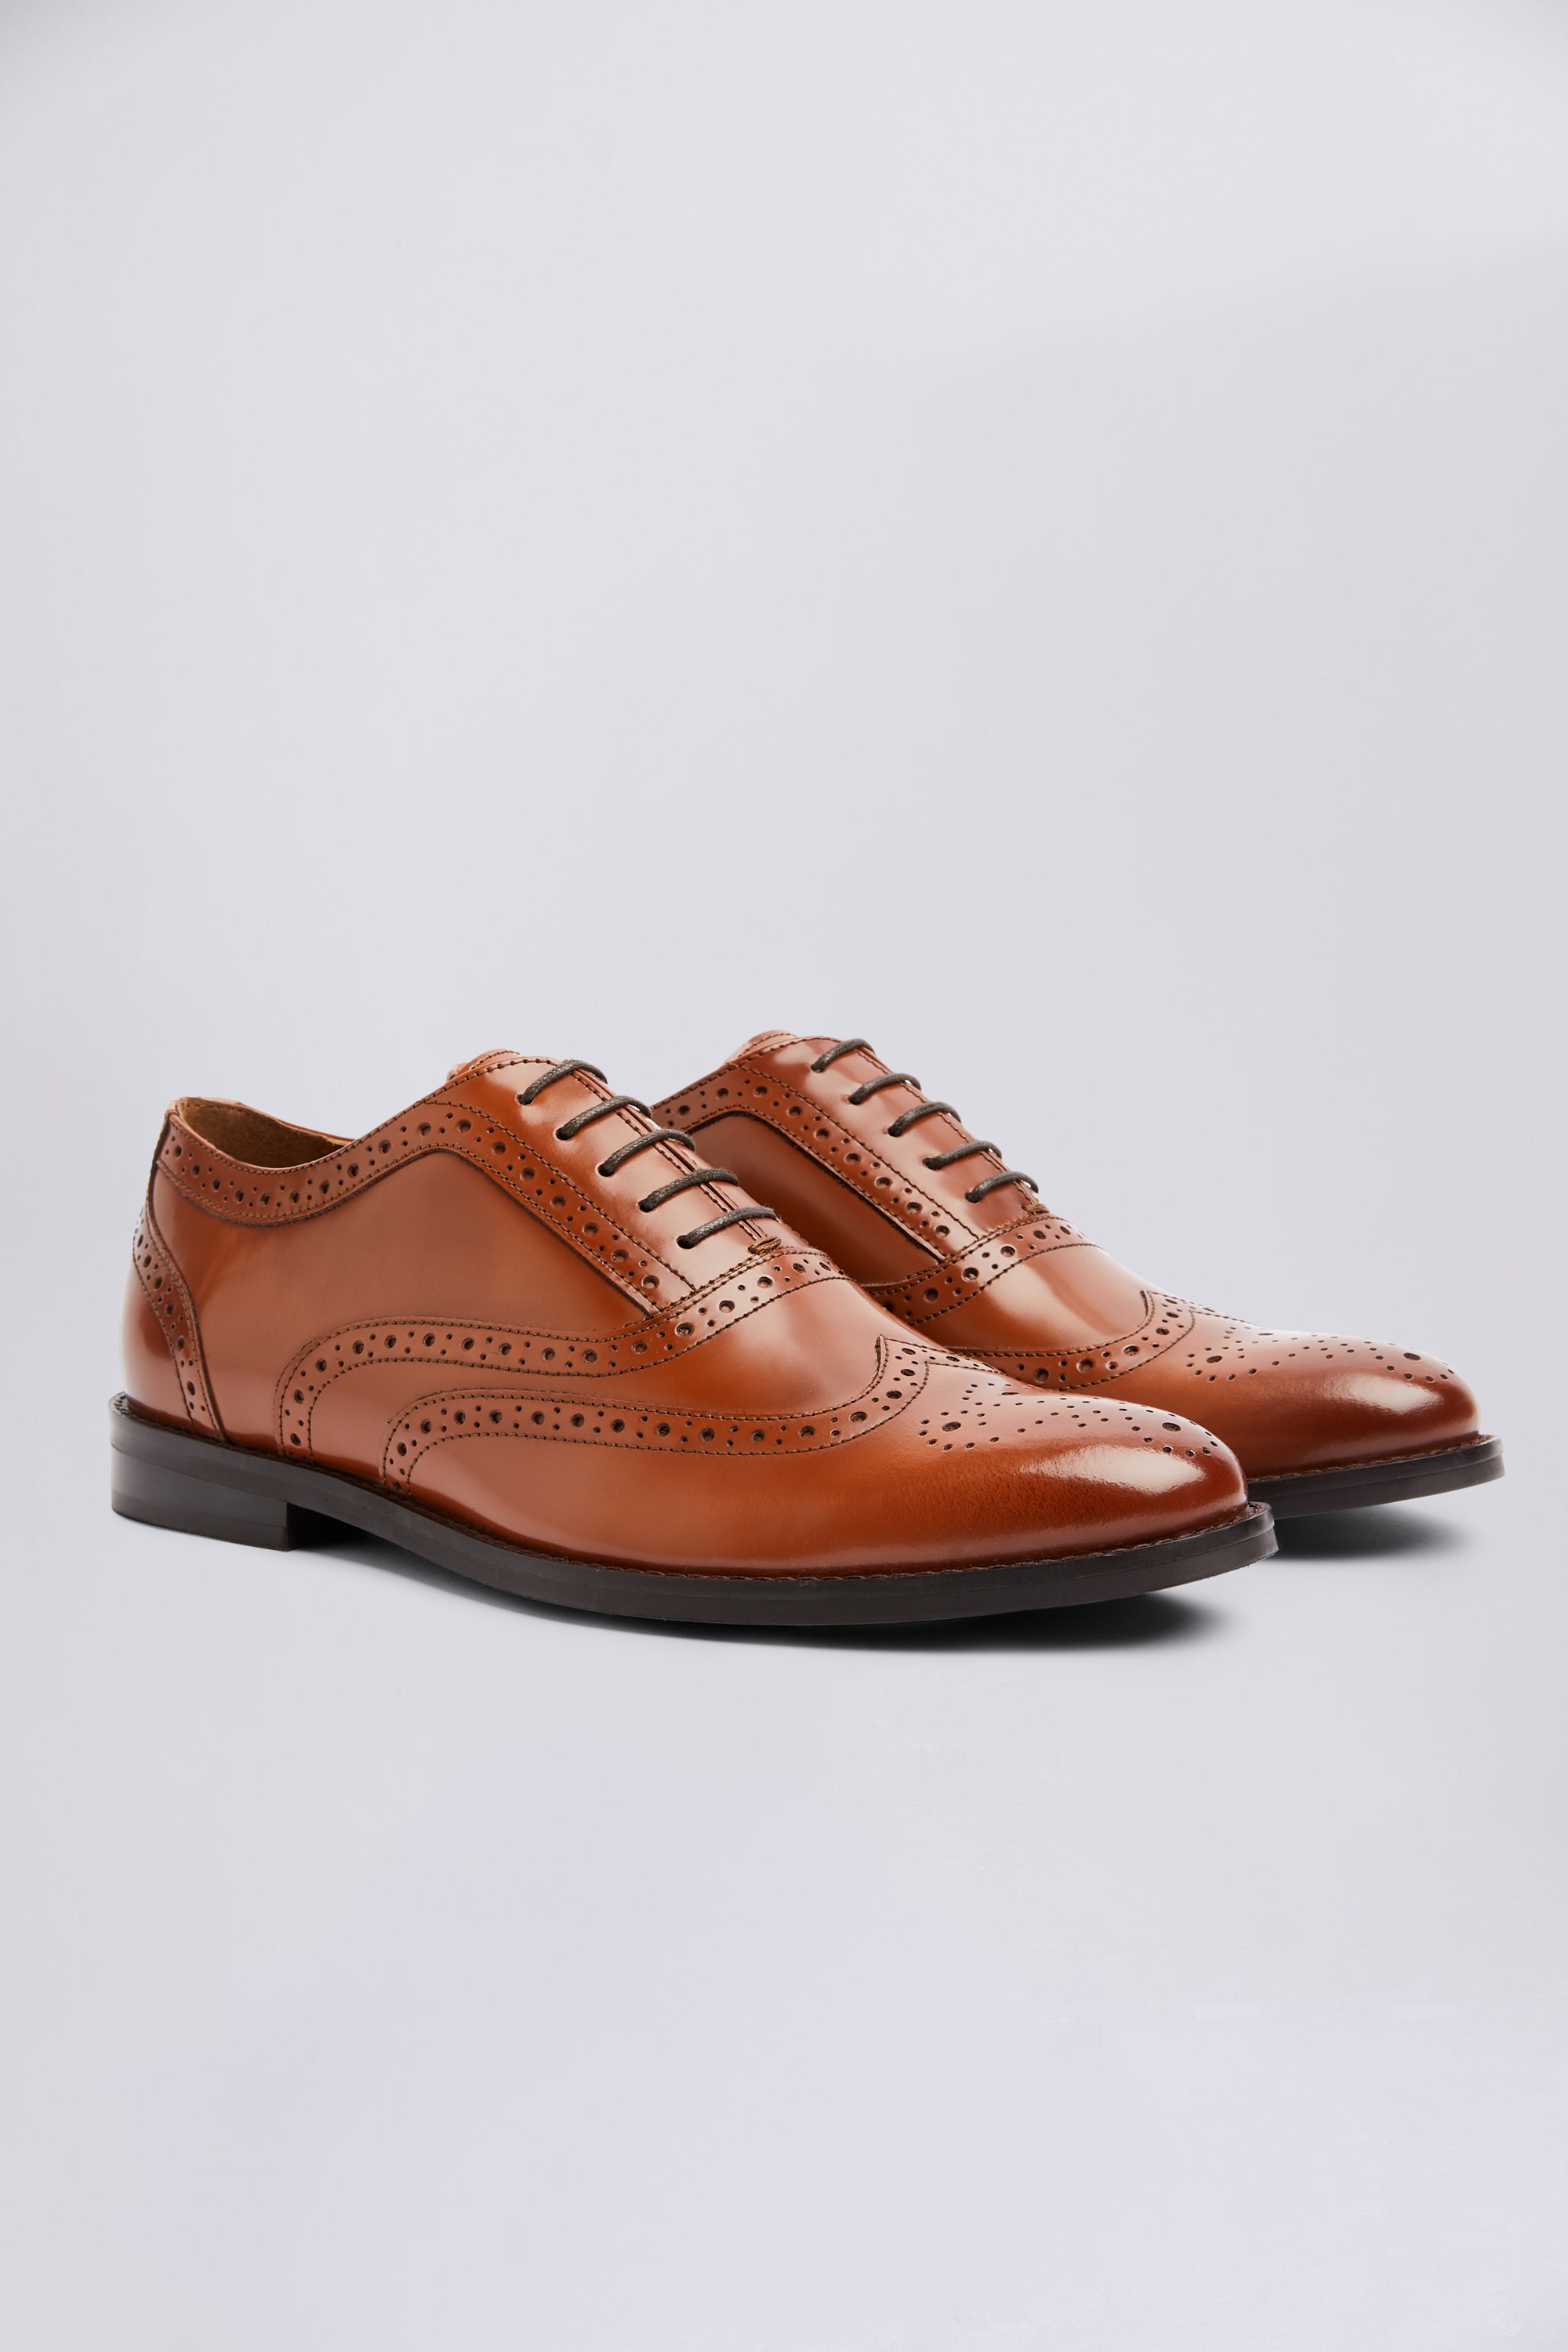 Oxford Tan Brogue Shoes | Buy Online at Moss